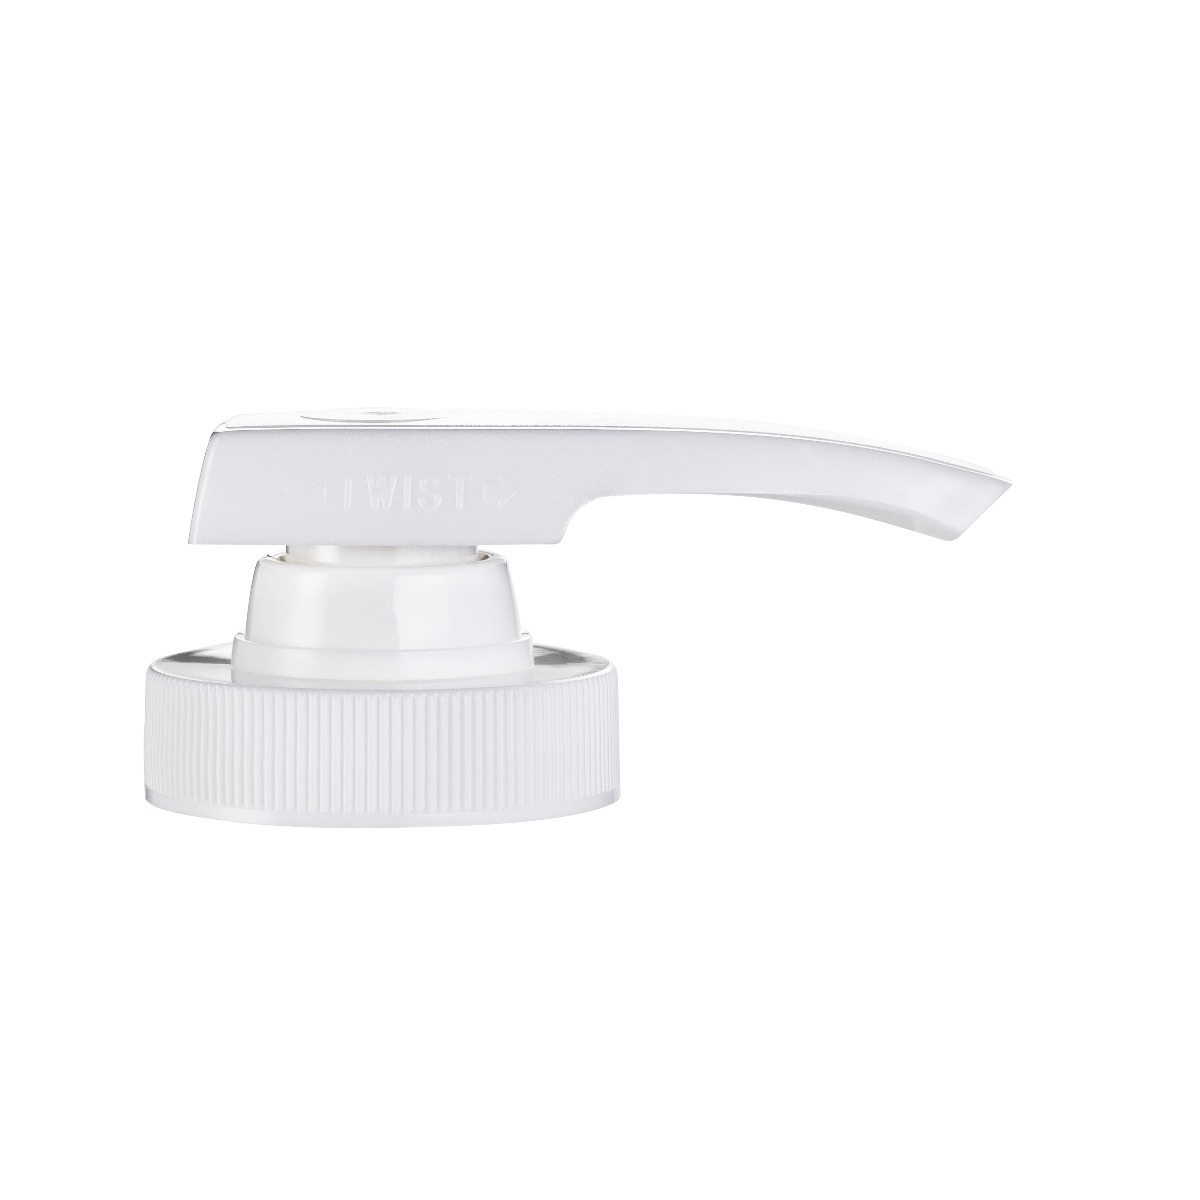 Twist lid container with dispensing spout